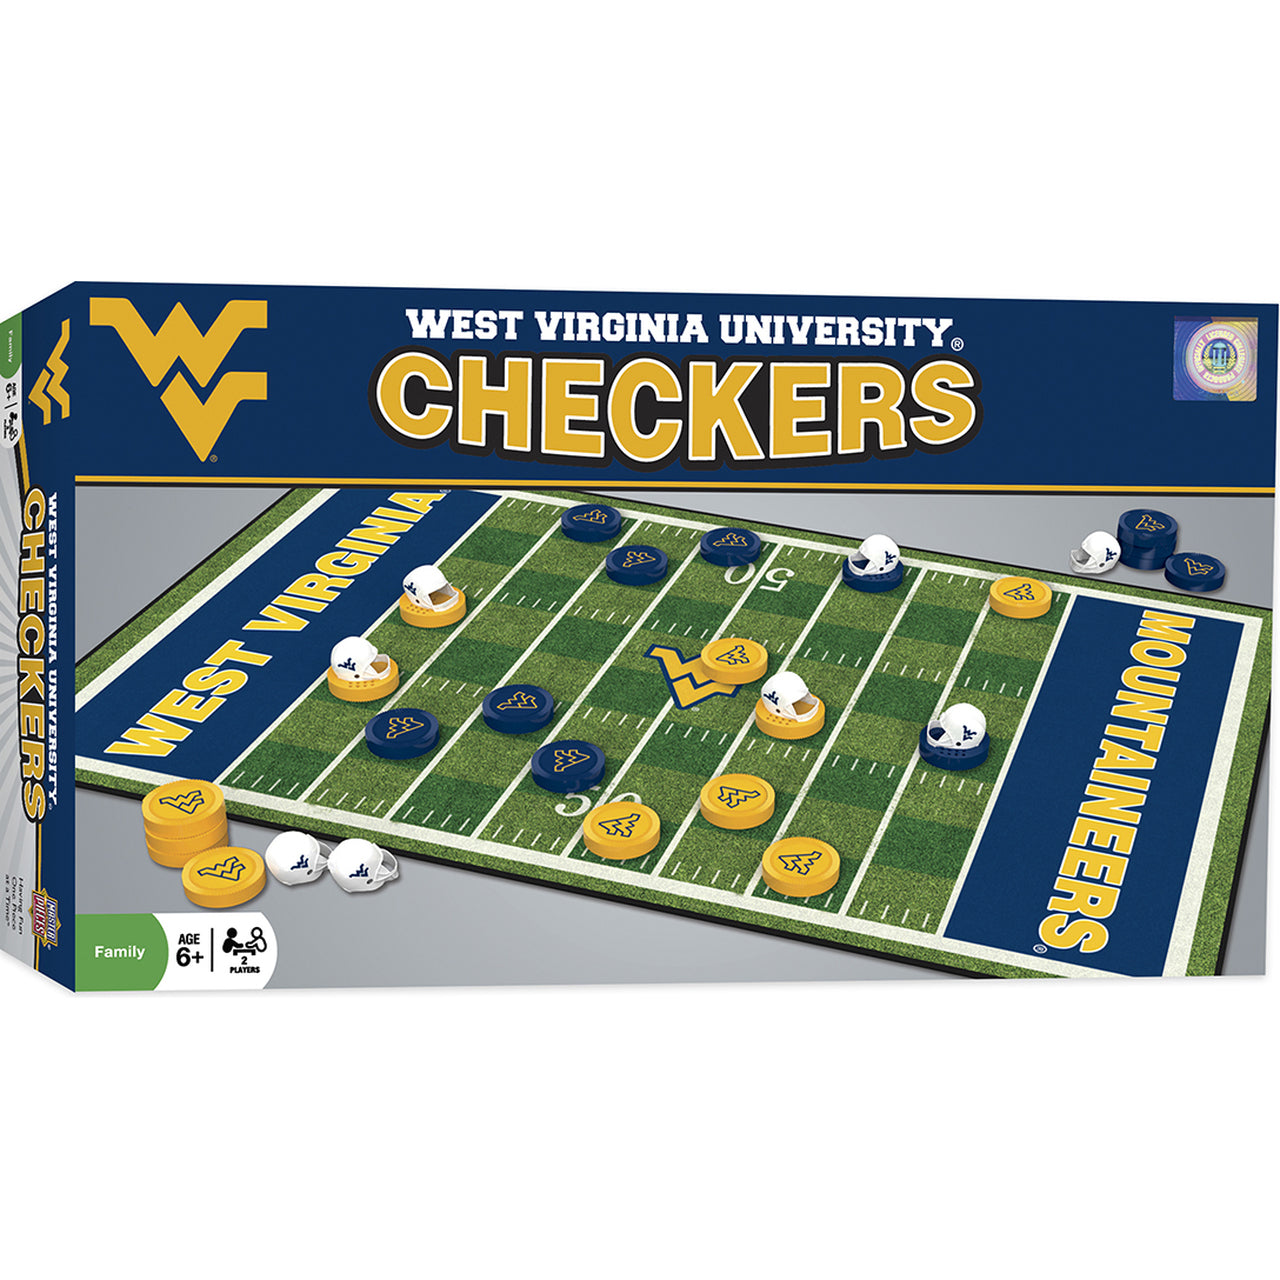 West Virginia {WVU} Mountaineers Checkers Board Game by Masterpieces